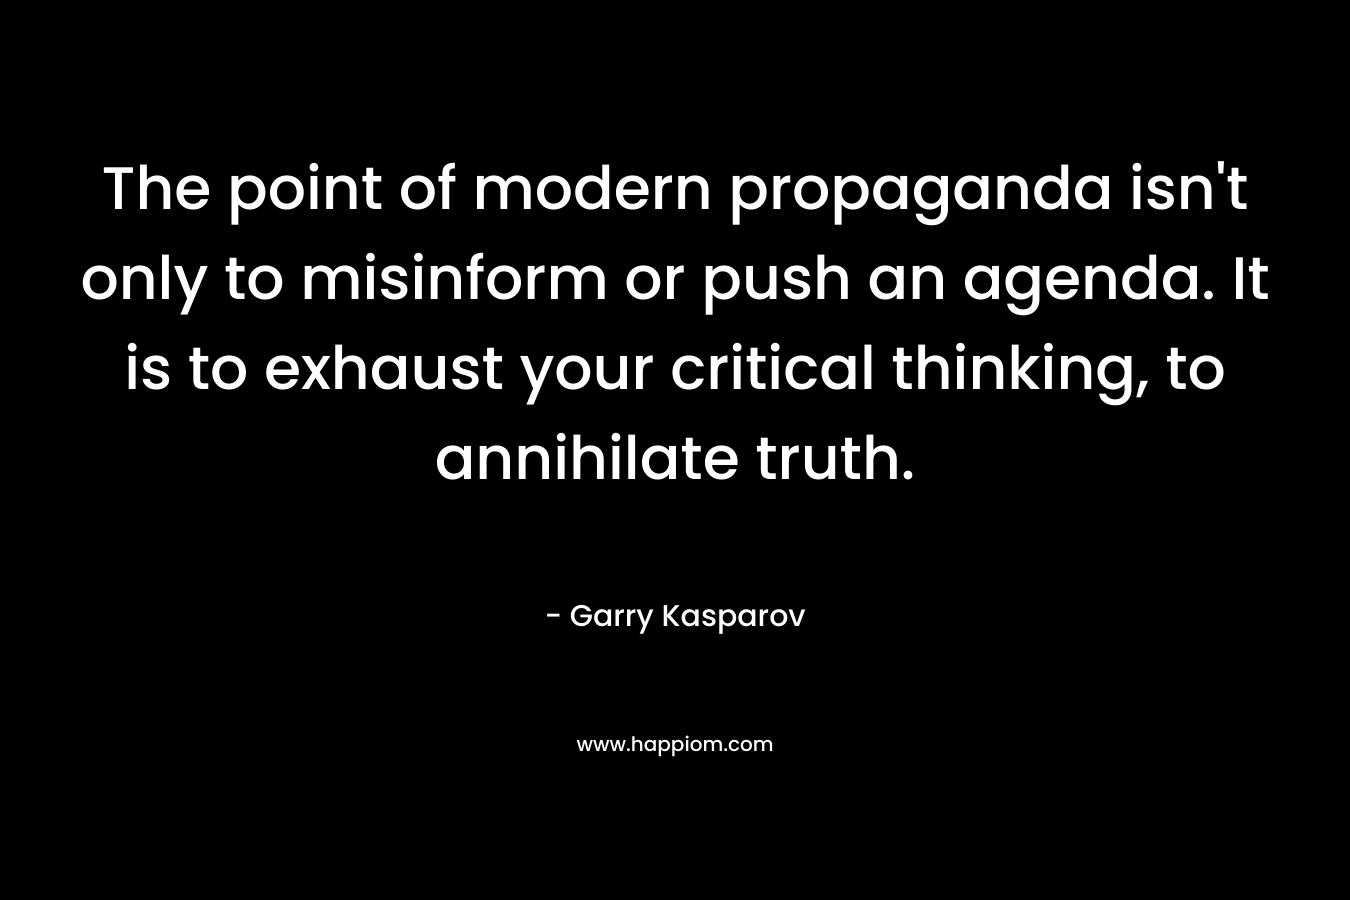 The point of modern propaganda isn’t only to misinform or push an agenda. It is to exhaust your critical thinking, to annihilate truth. – Garry Kasparov